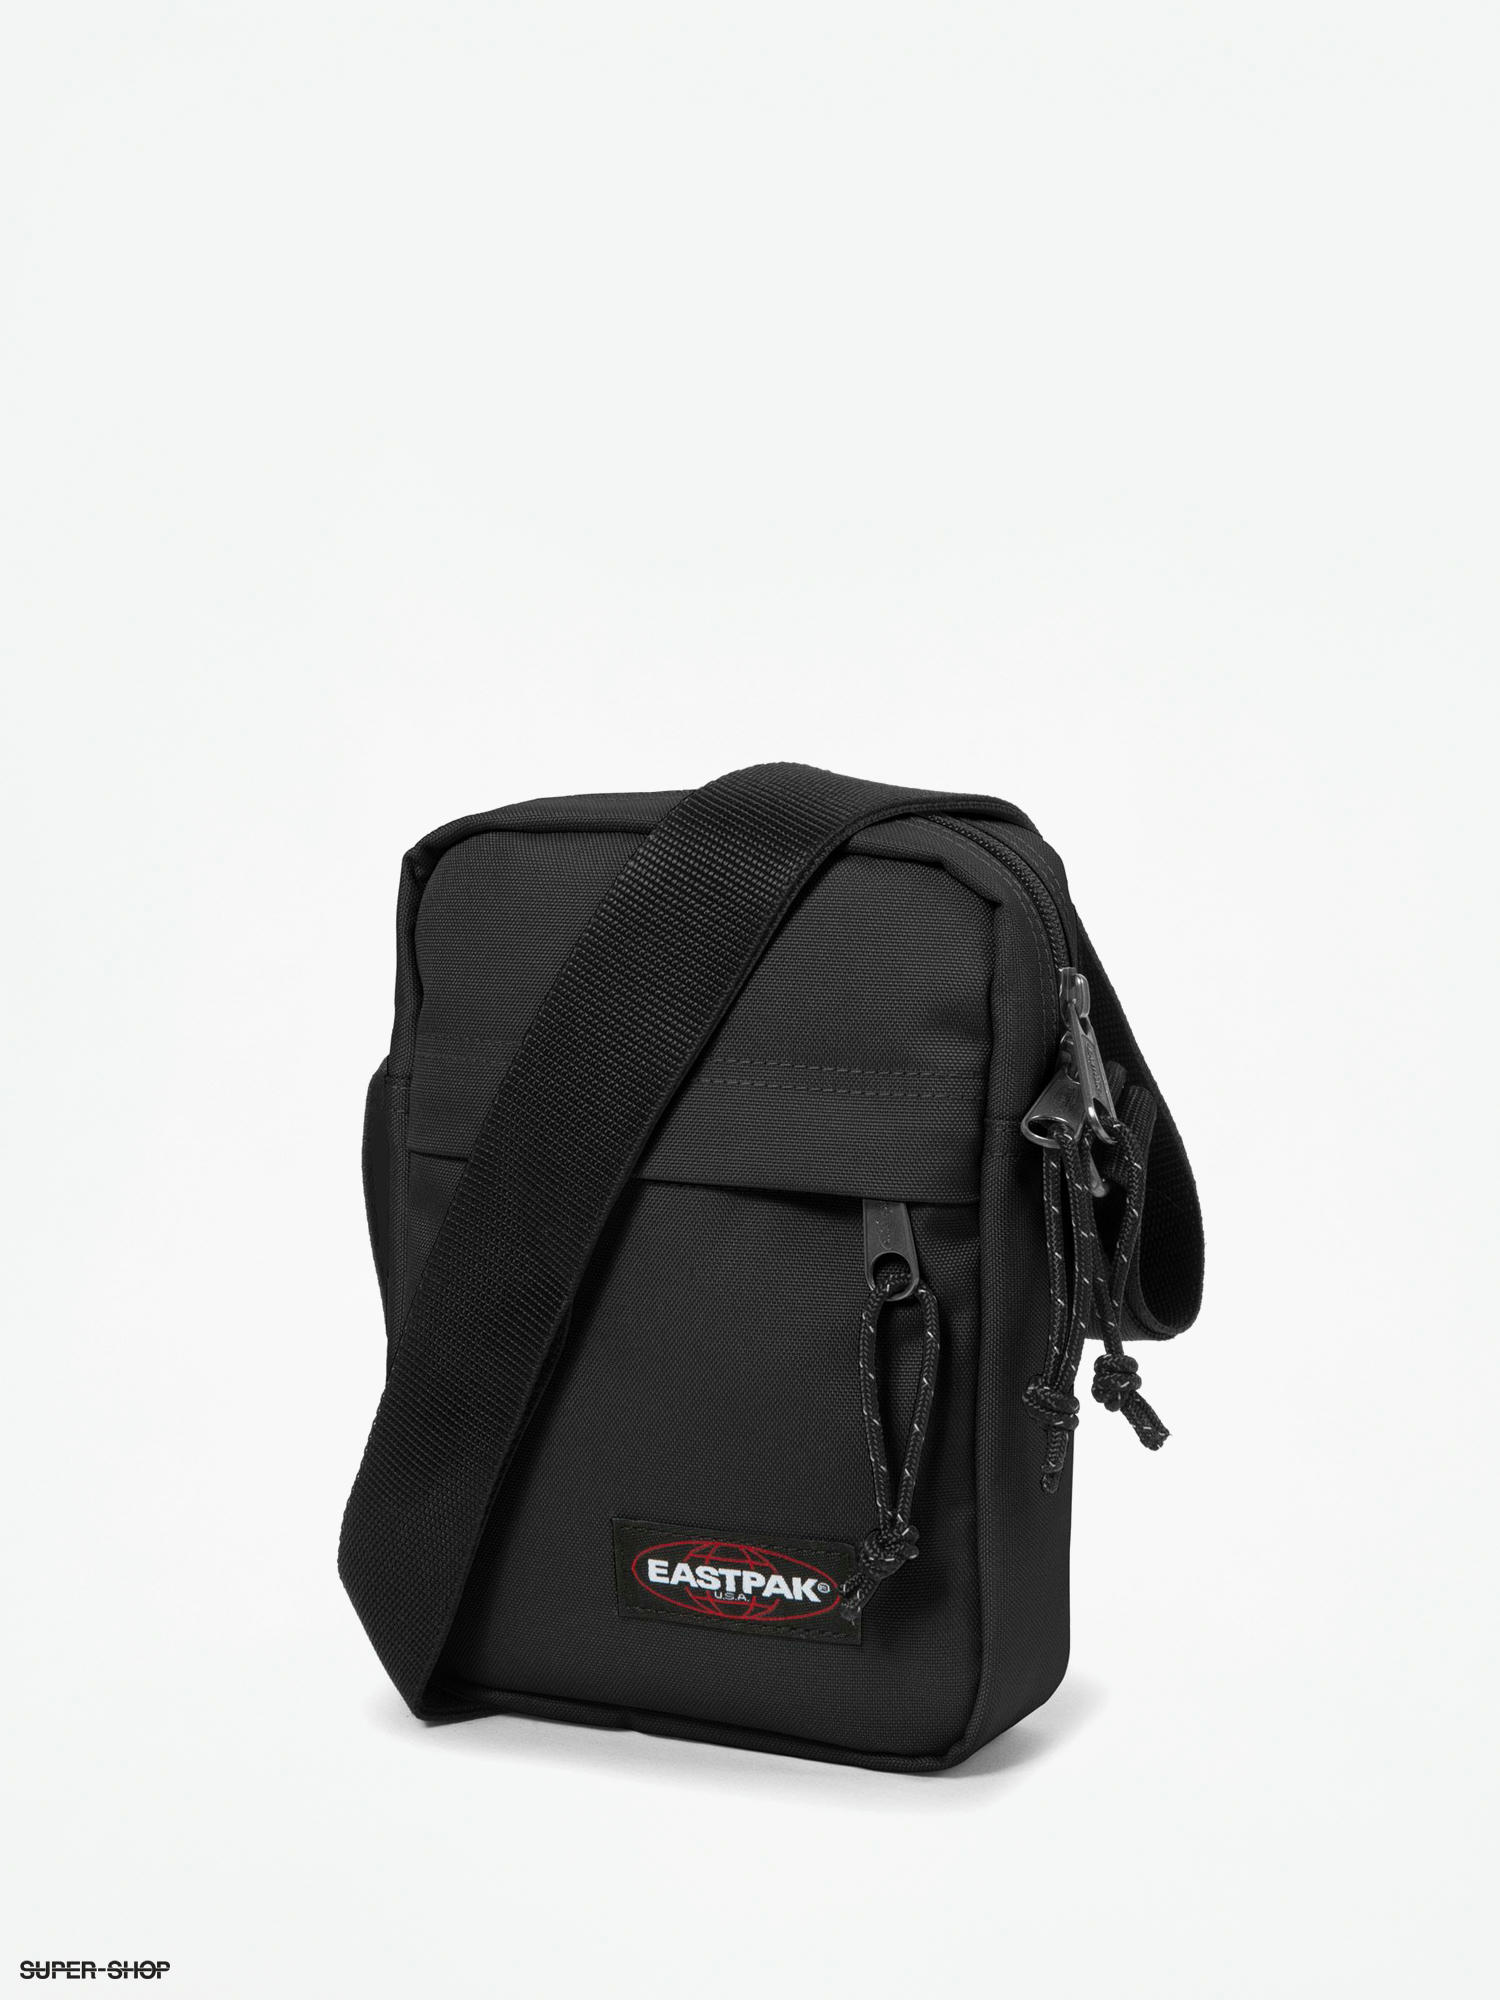 Eastpak The One Poucher Bag - buy at Blue Tomato